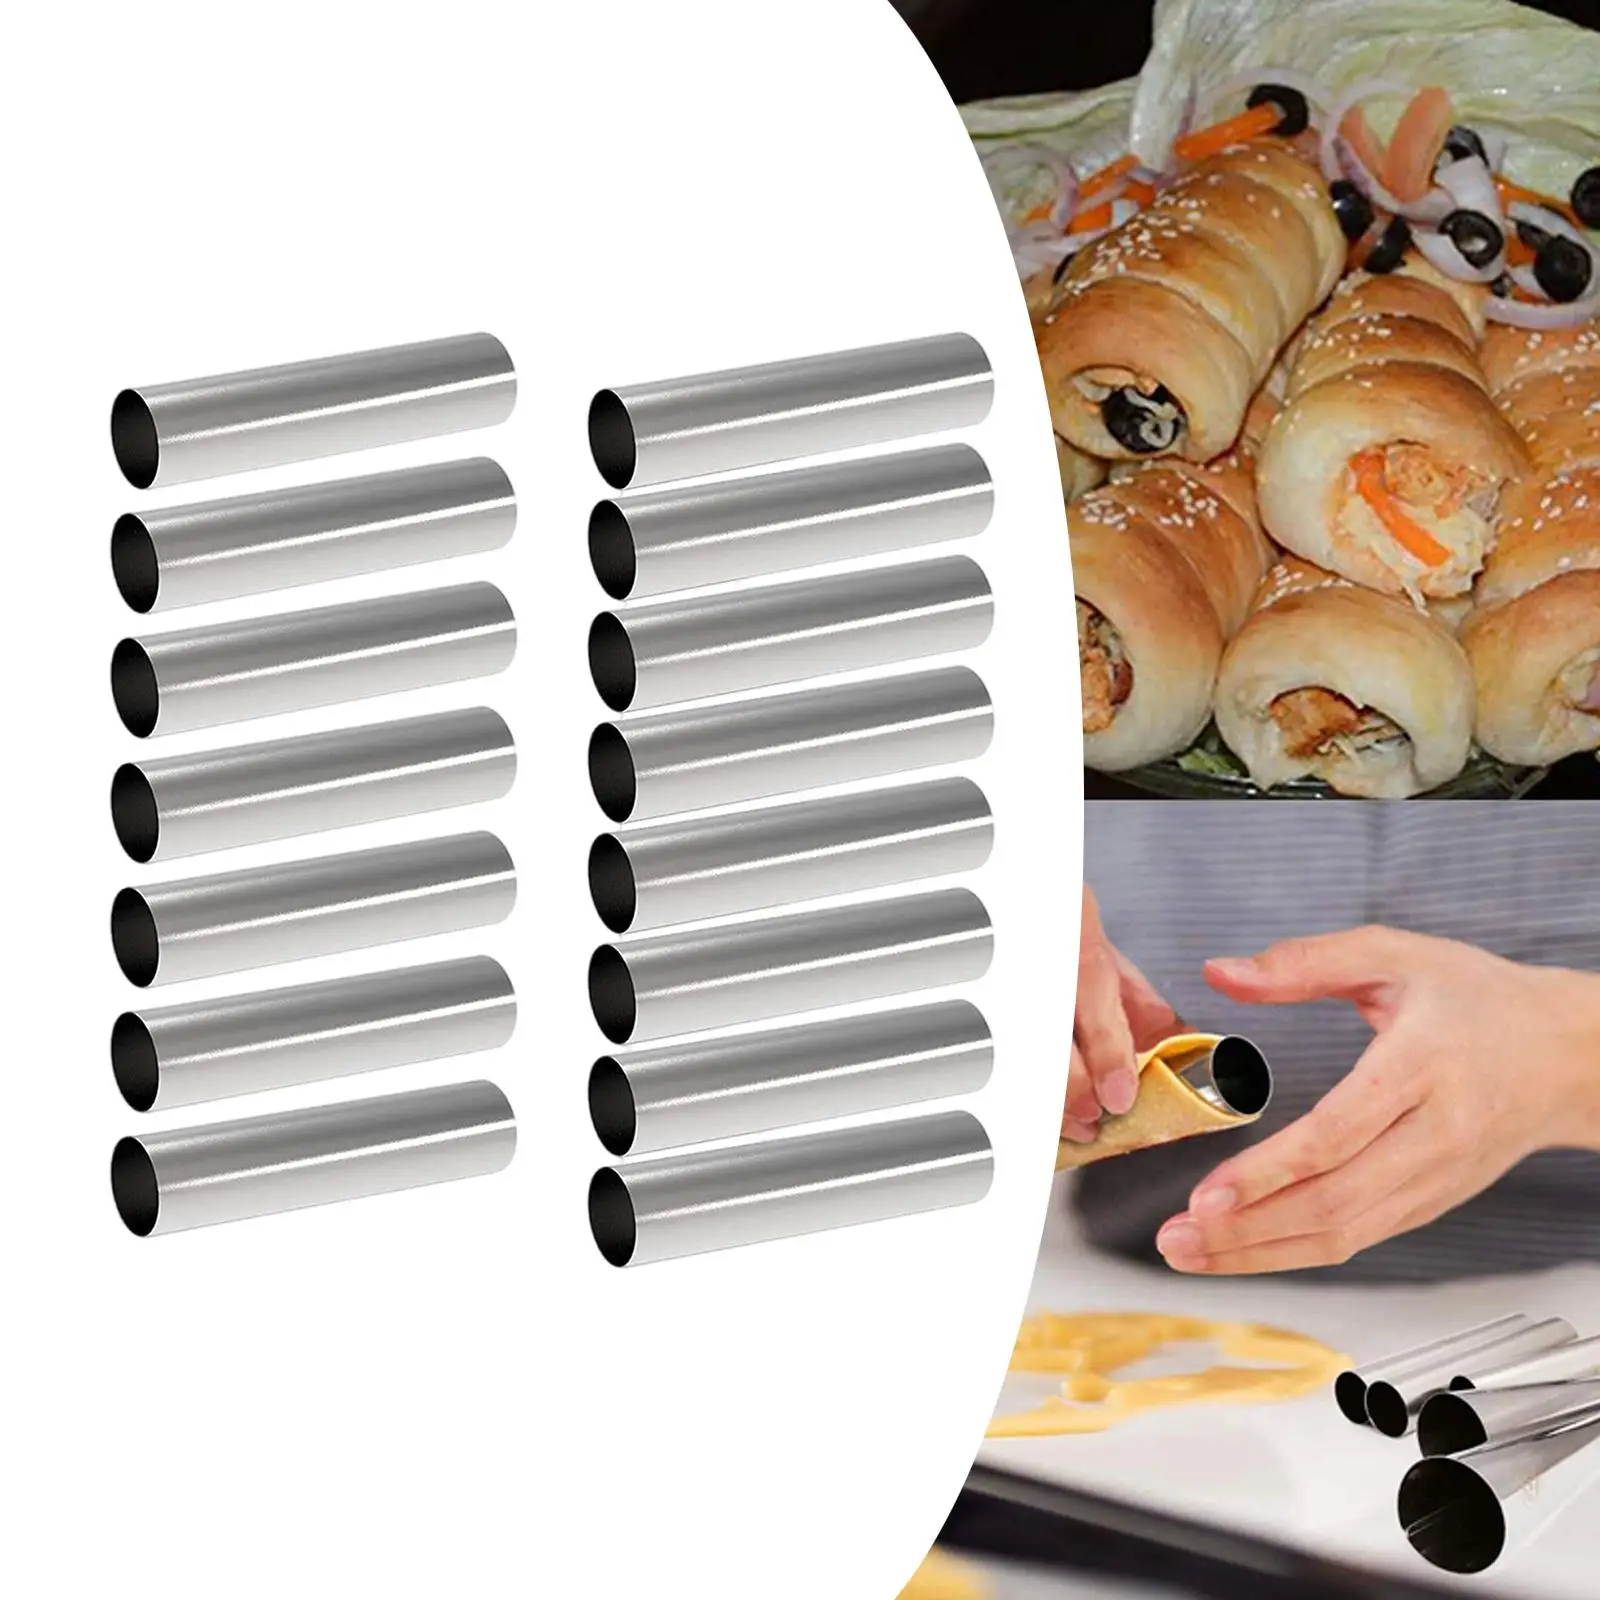 15x Cannoli Form Tubes Baking Tools Cake Horn Mould for Making Butter Horns